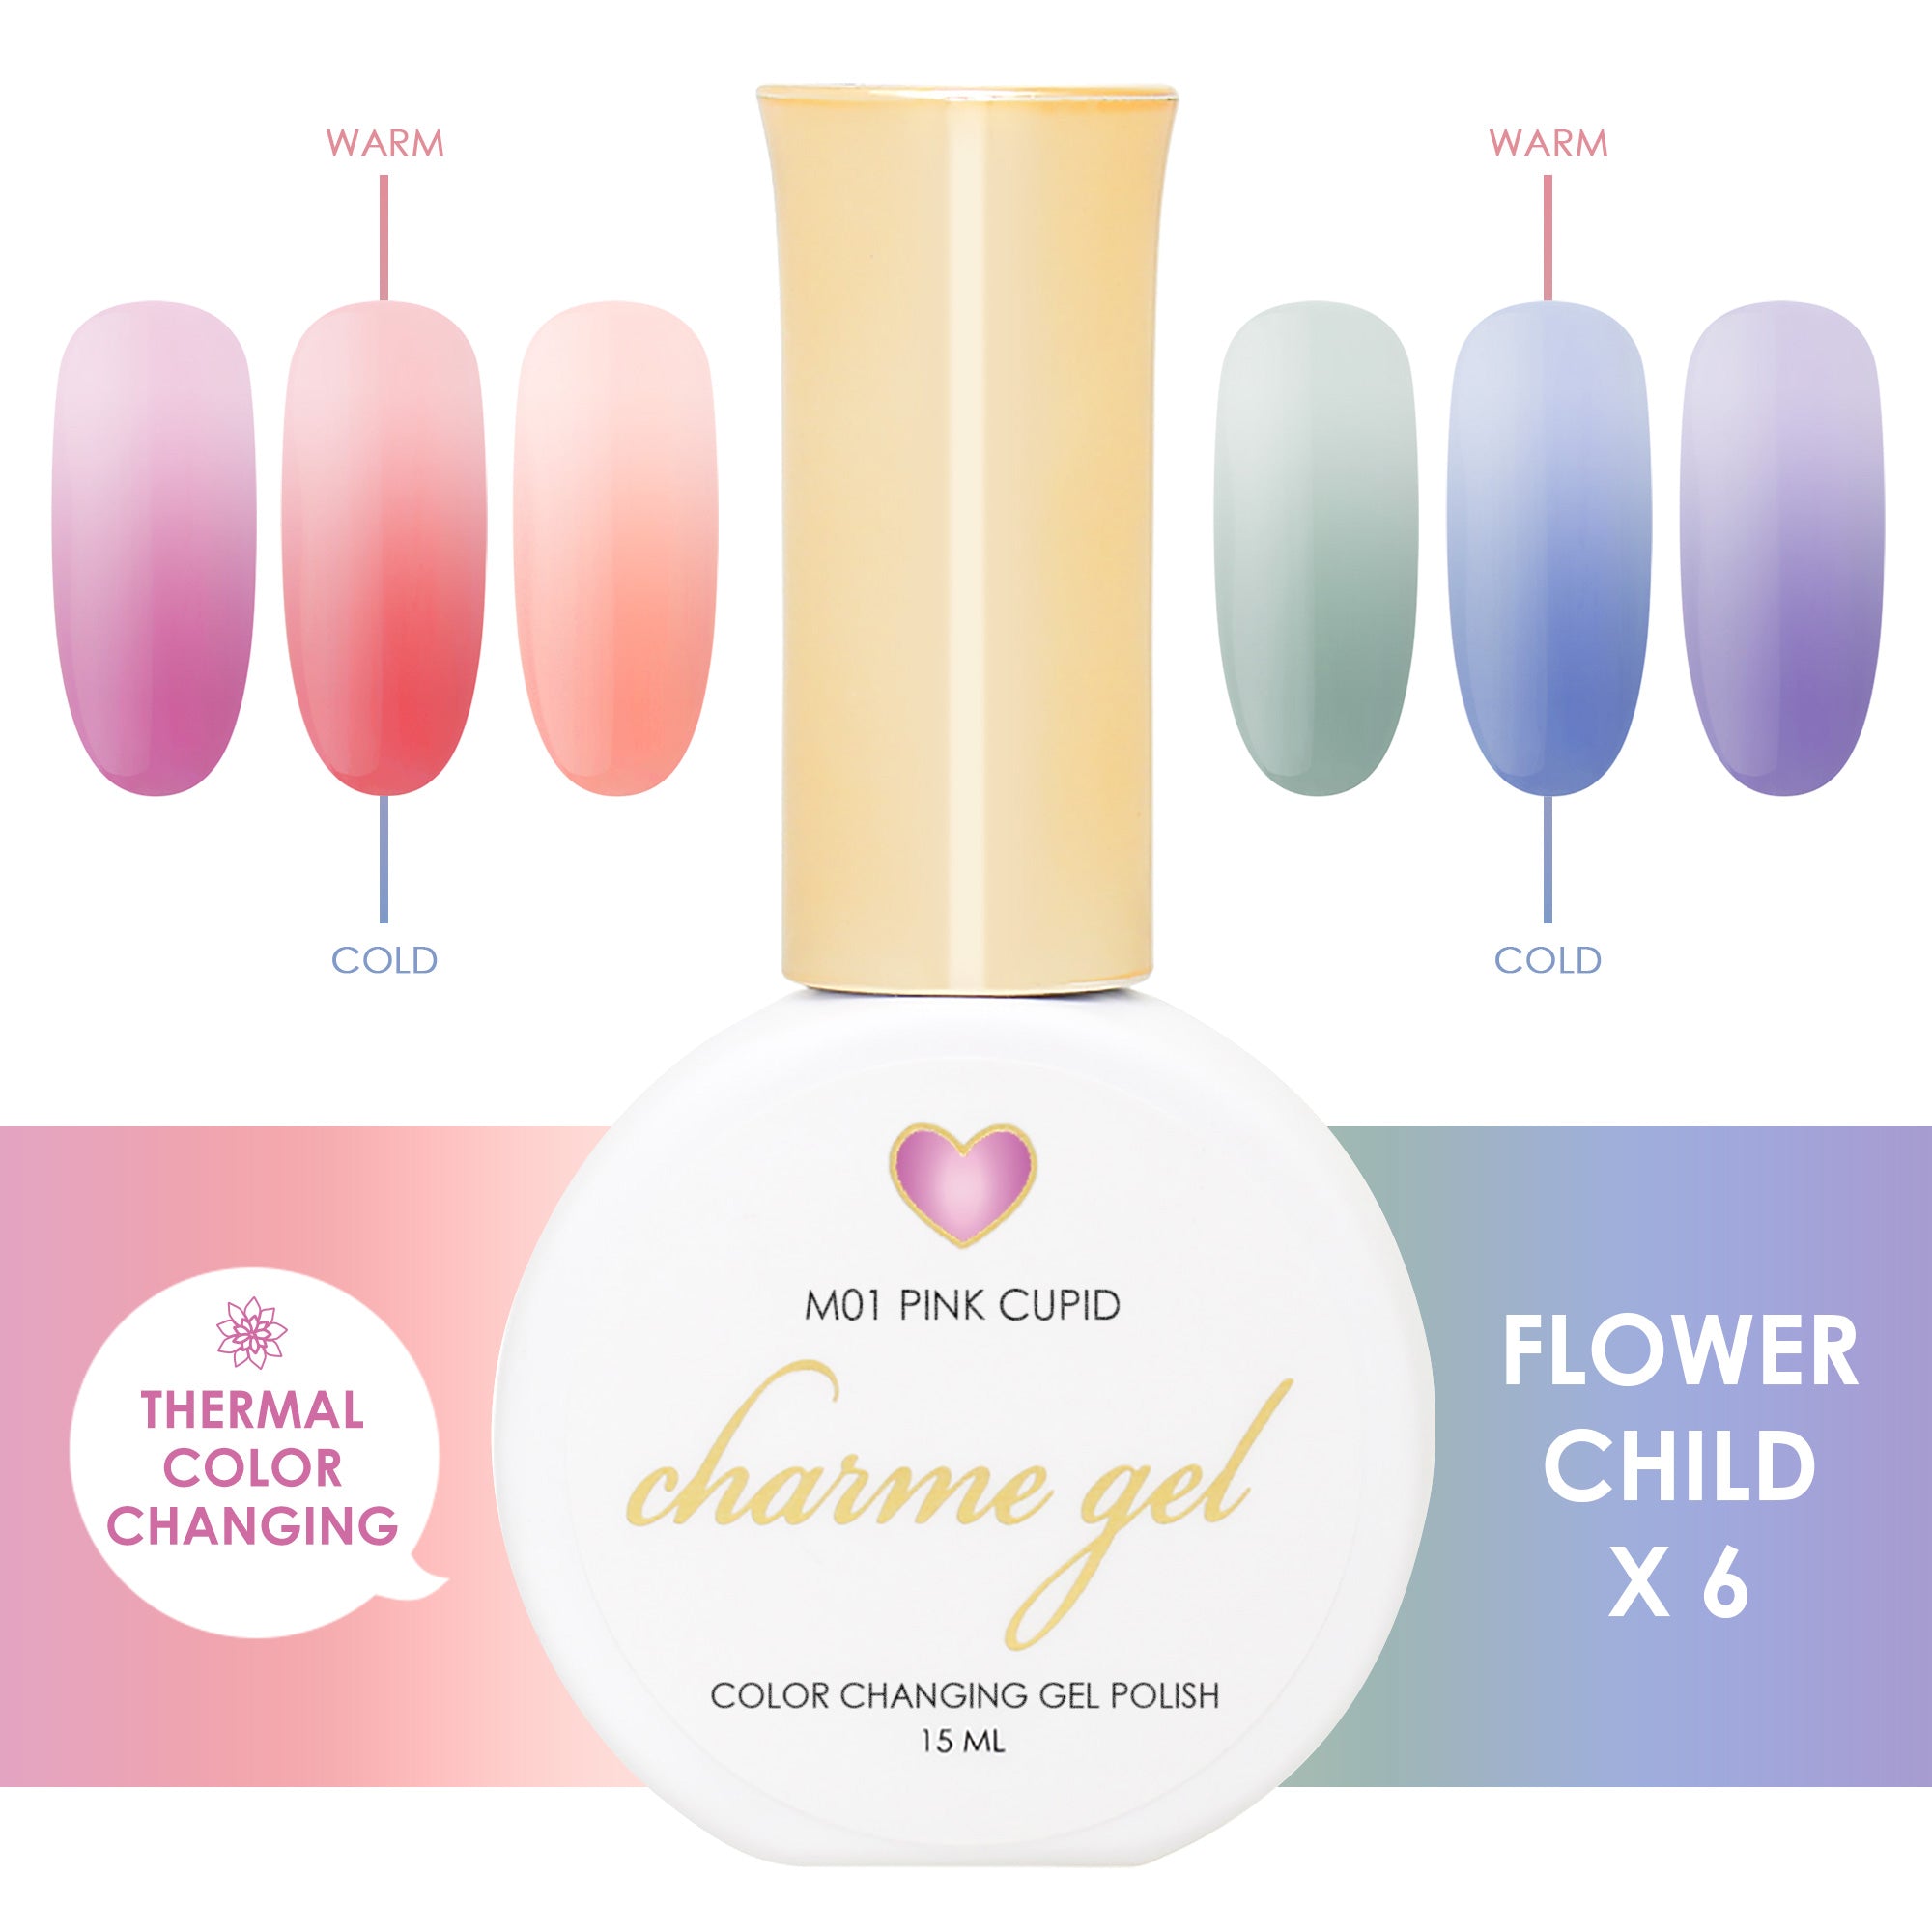 Charme Gel Flower Child Collection / 6 Colors